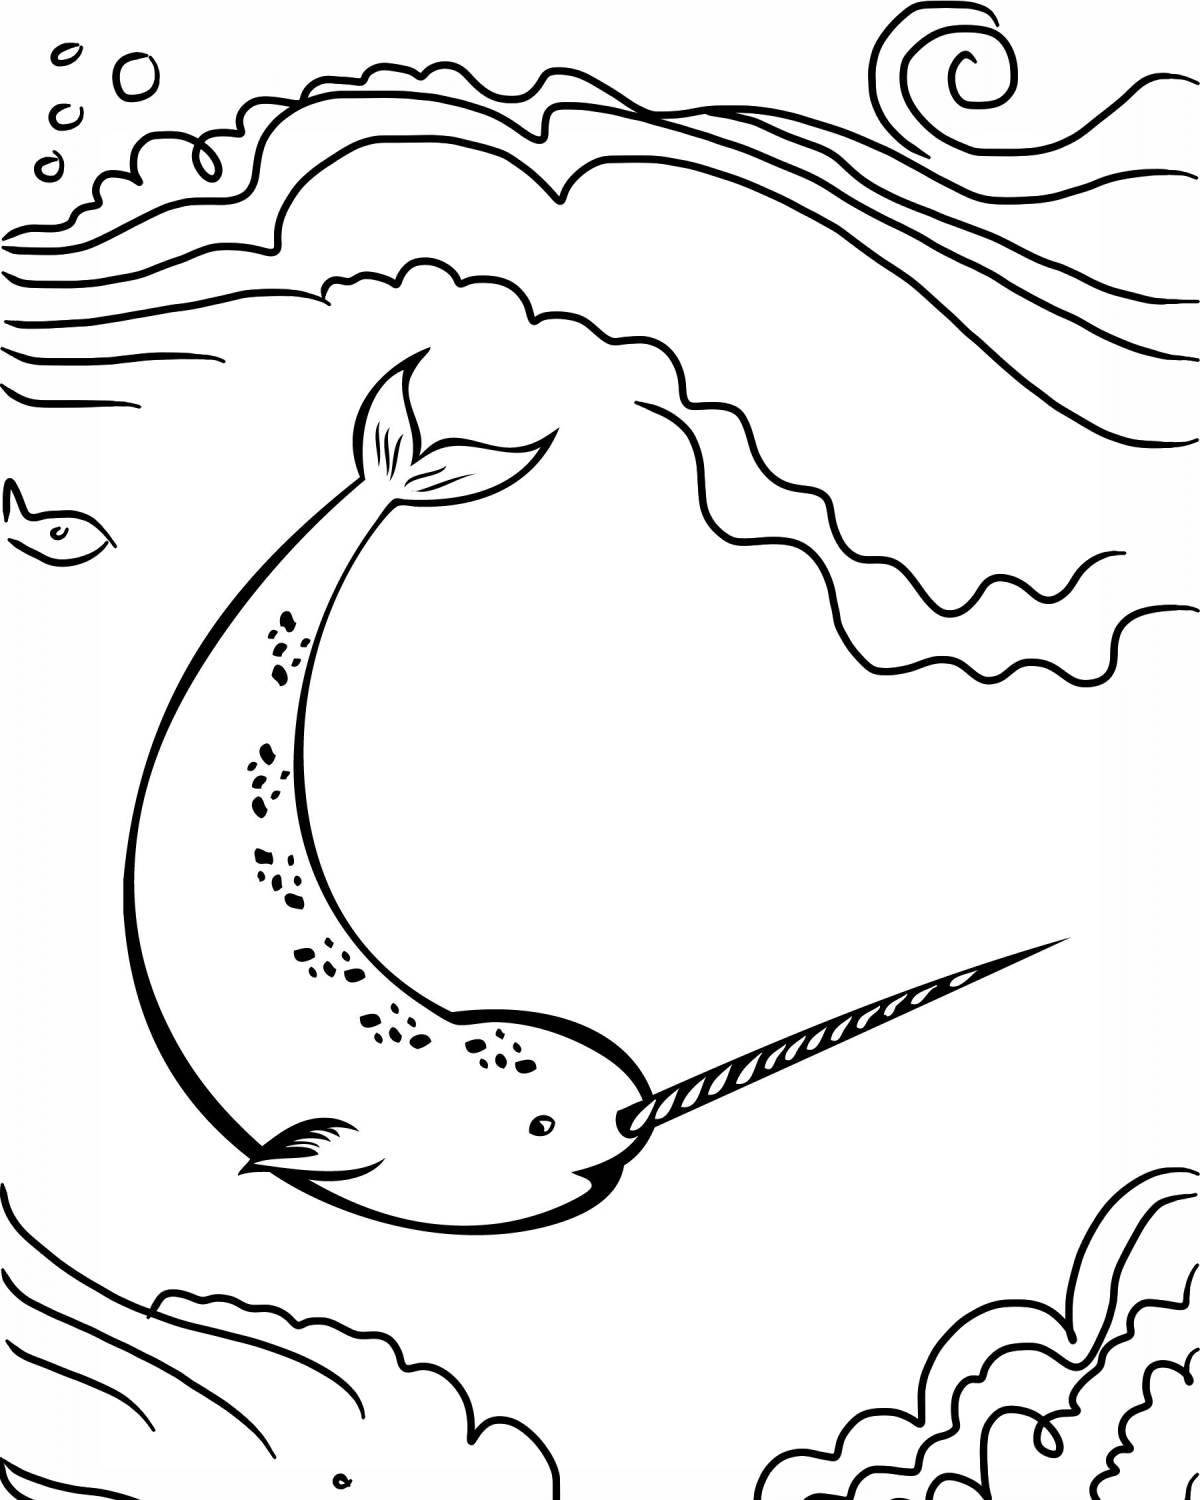 Great narwhal coloring book